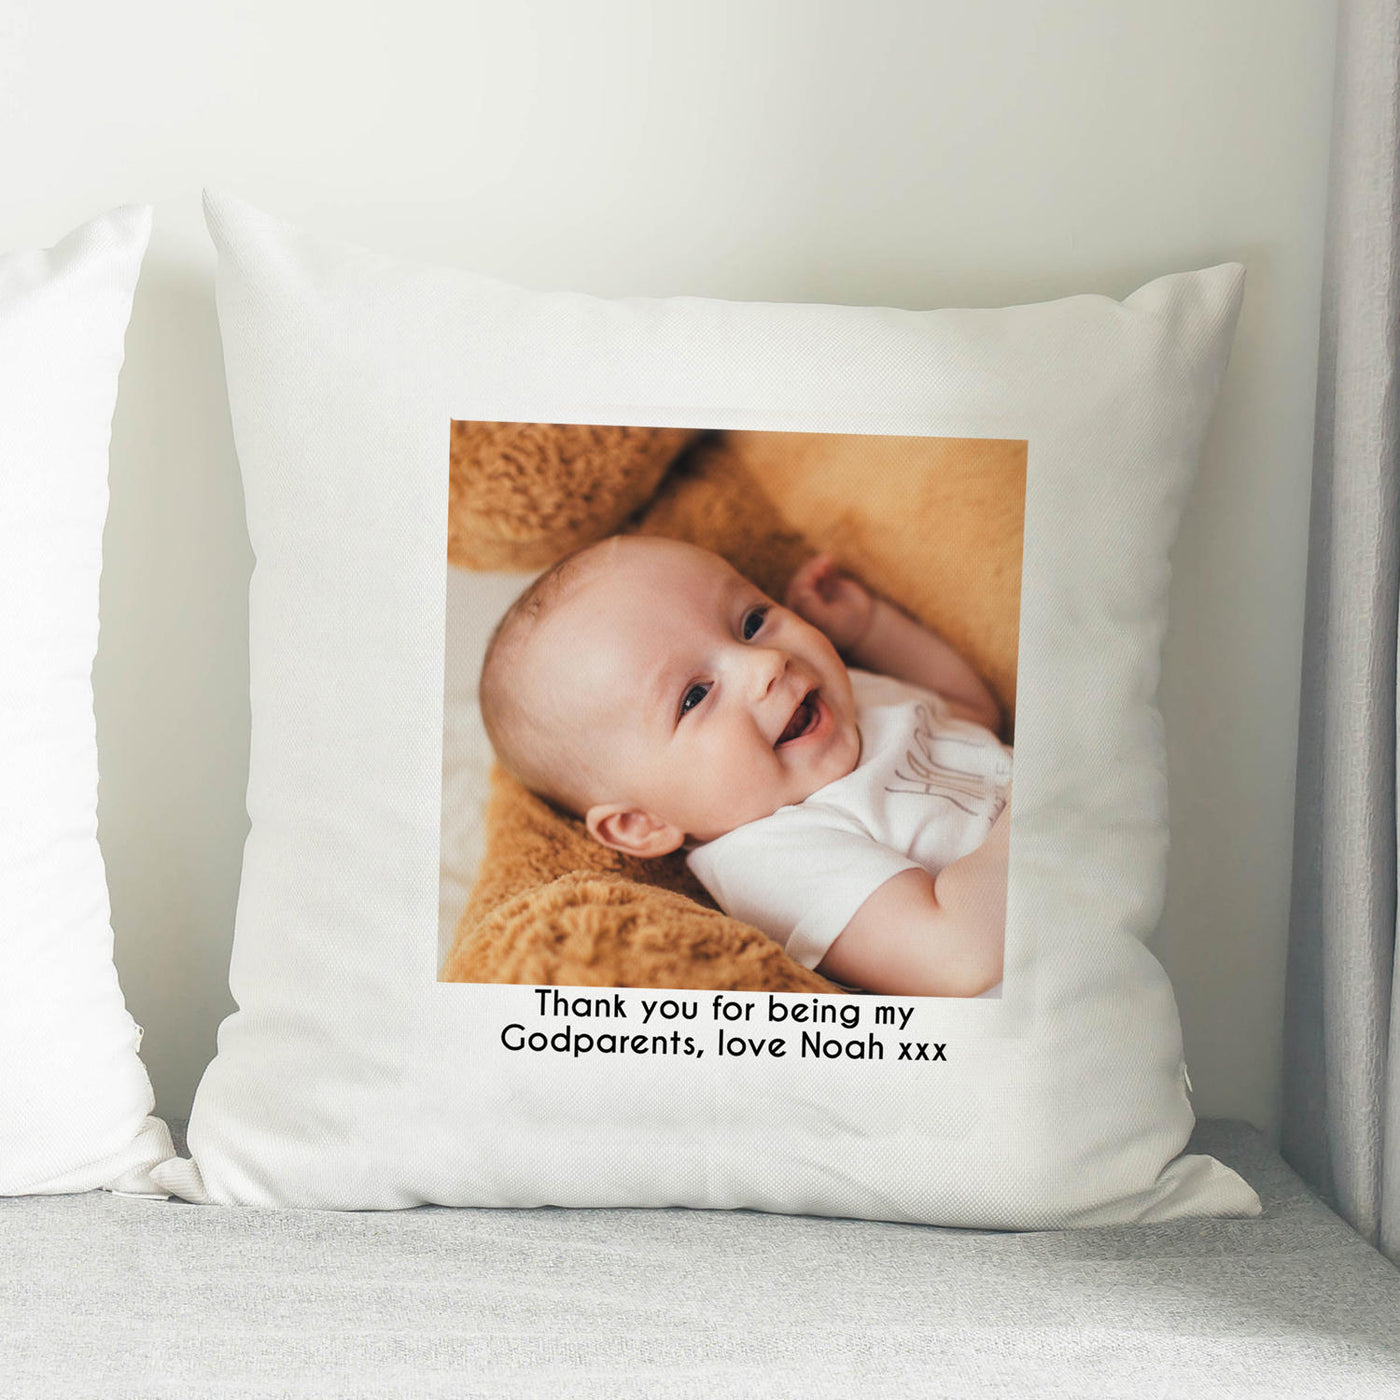 Personalised Photo Upload Cushion With Text